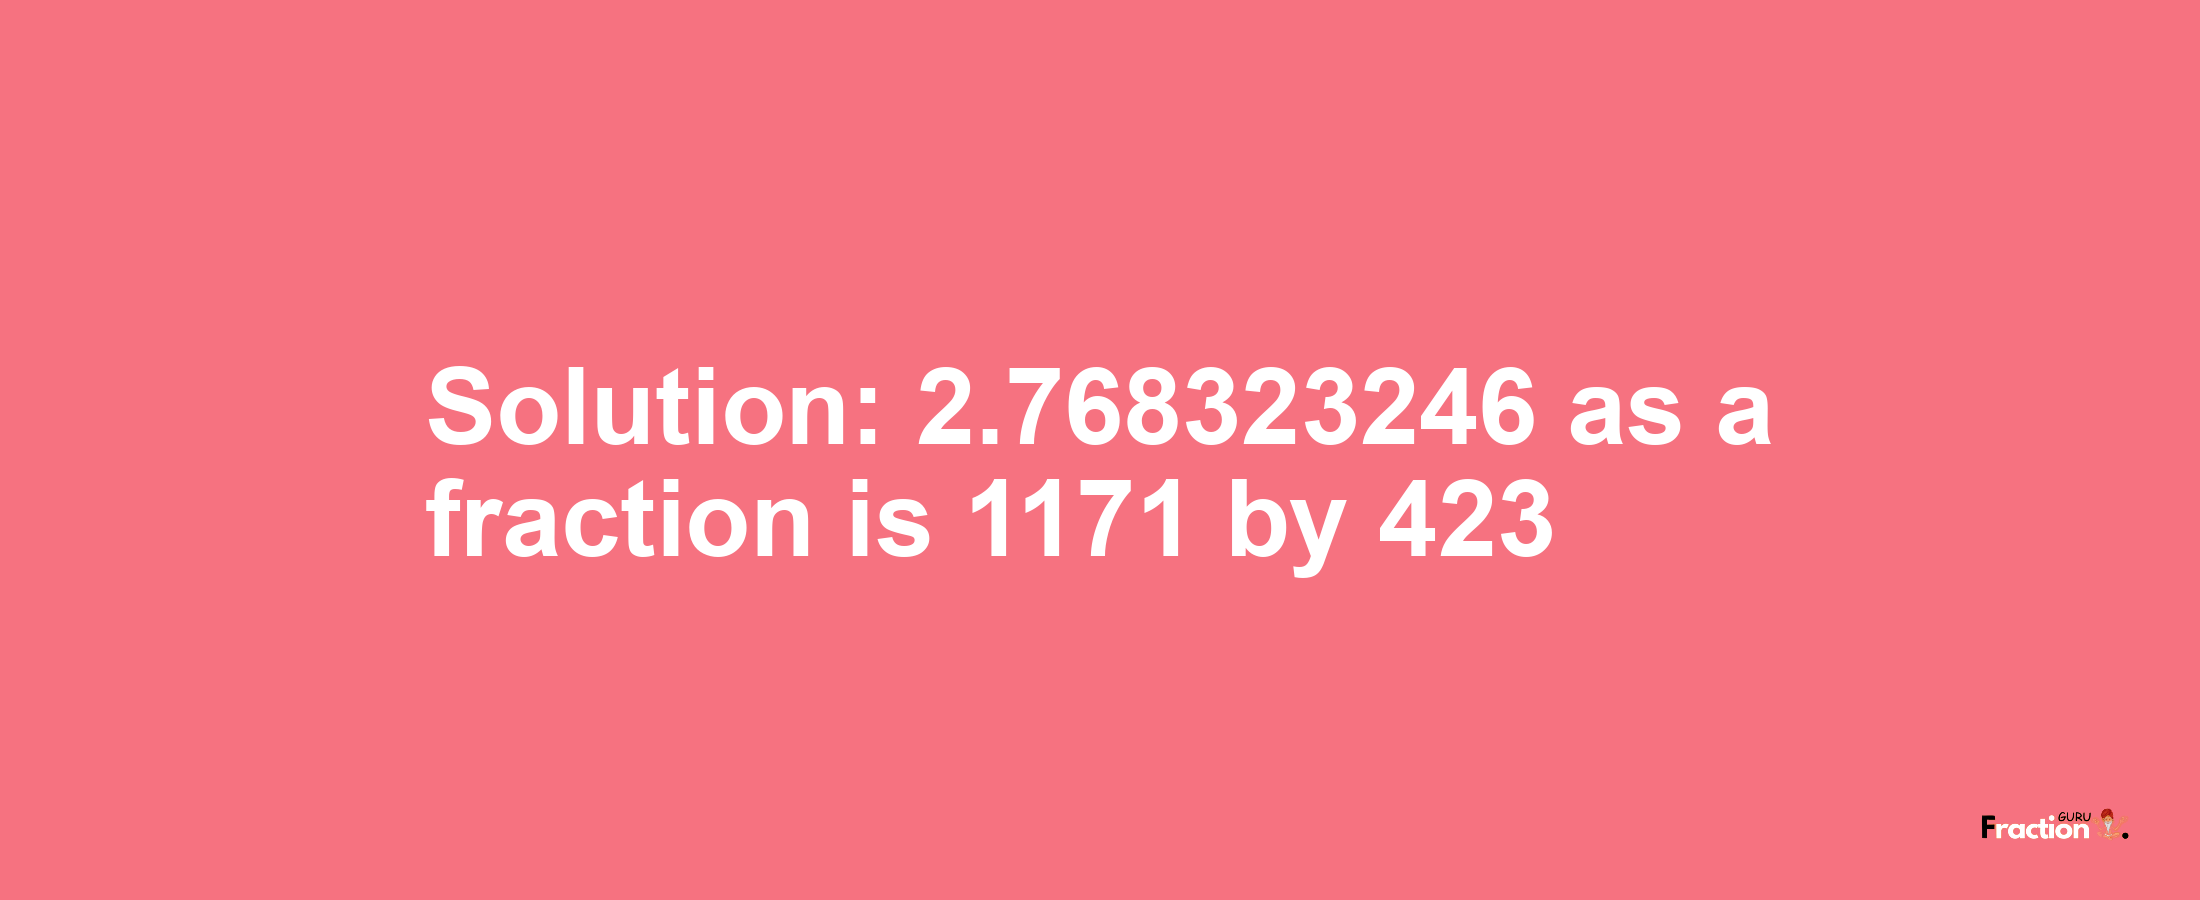 Solution:2.768323246 as a fraction is 1171/423